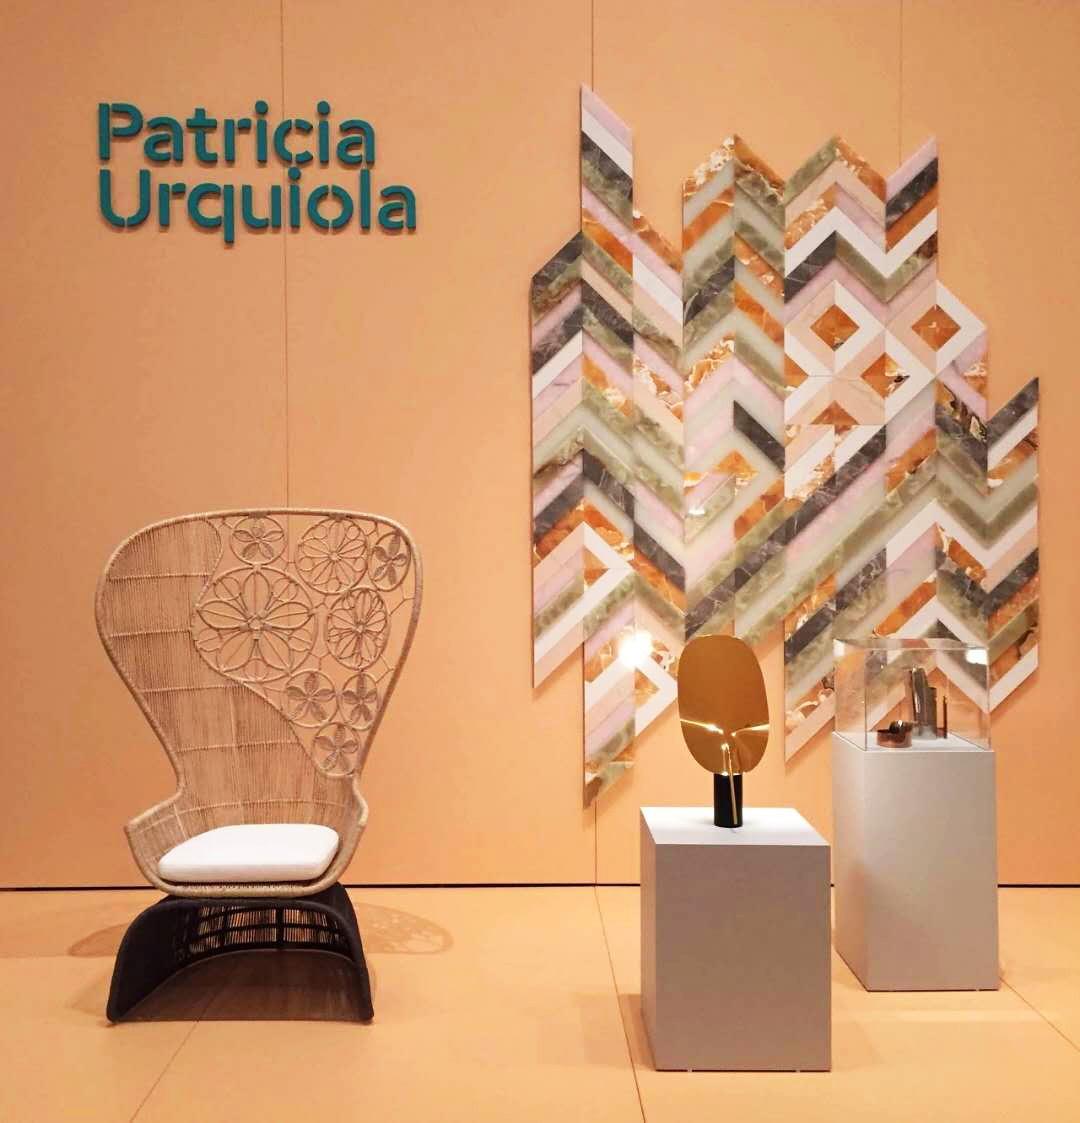 Why Famed Architect Patricia Urquiola Designs With A Social Focus